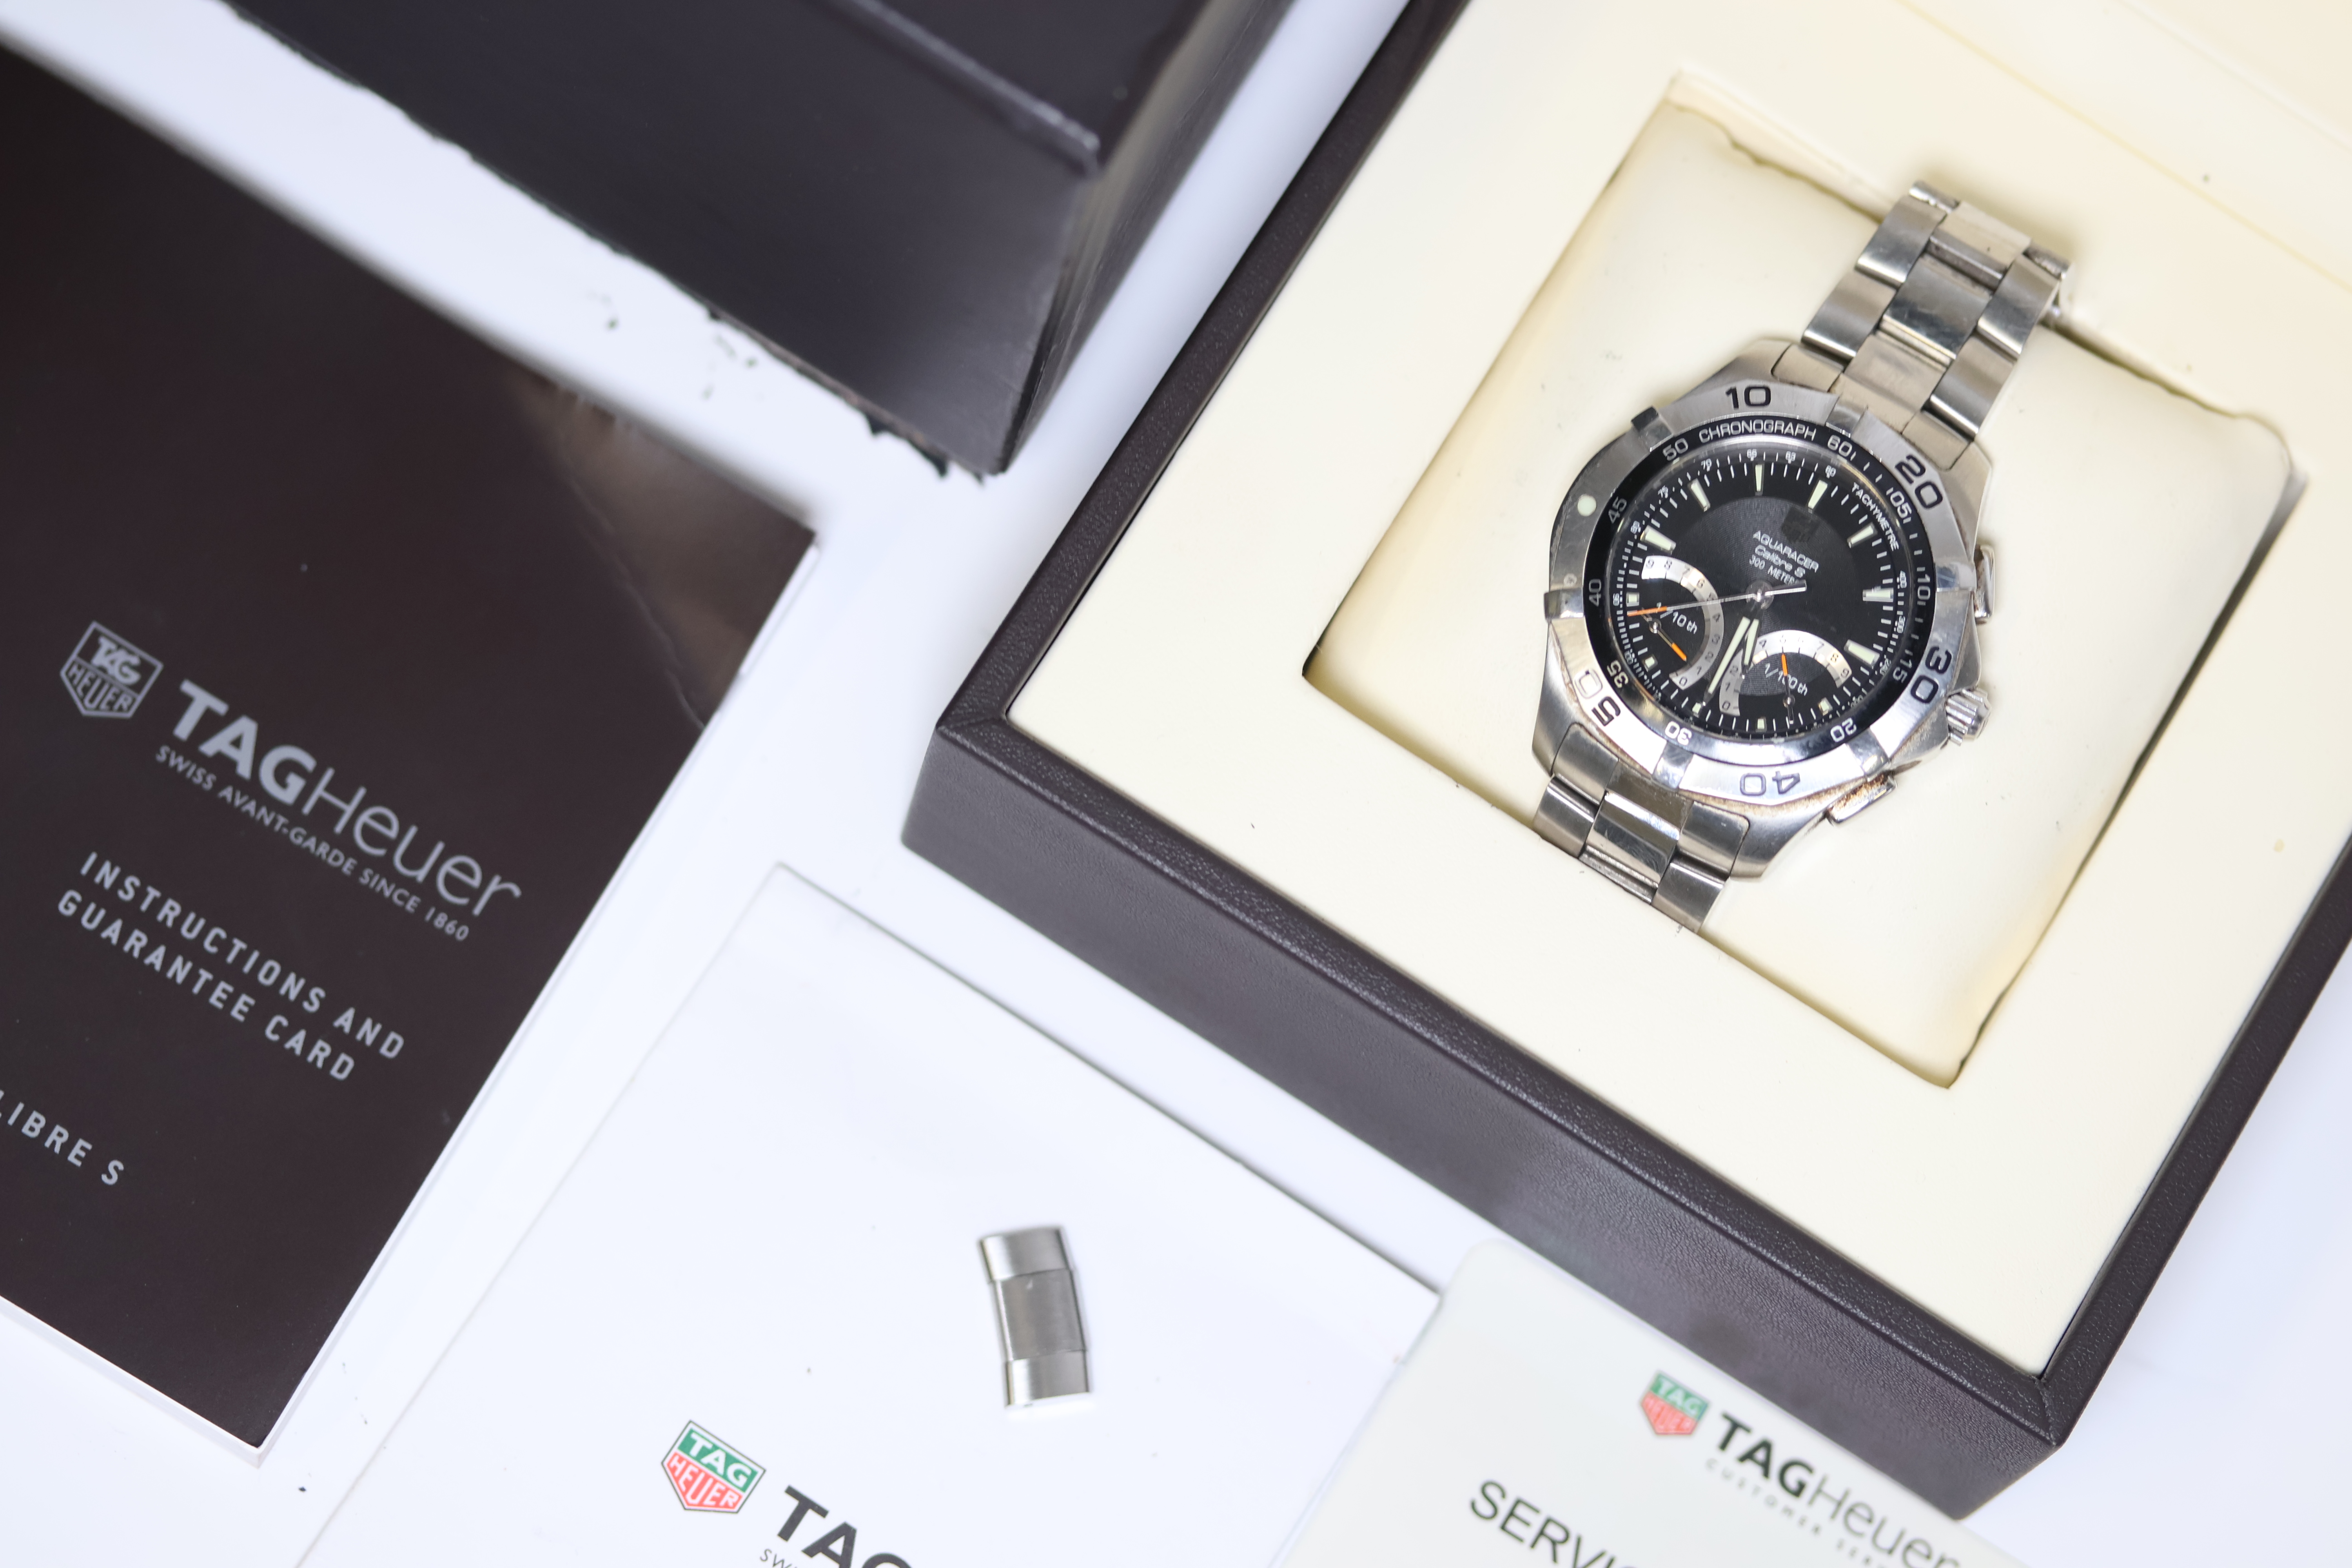 TAG HEUER AQUARACER CALIBRE S REFERENCE CAF7010 WITH BOX AND PAPERS 2014, black dial, chronograph to - Image 7 of 7